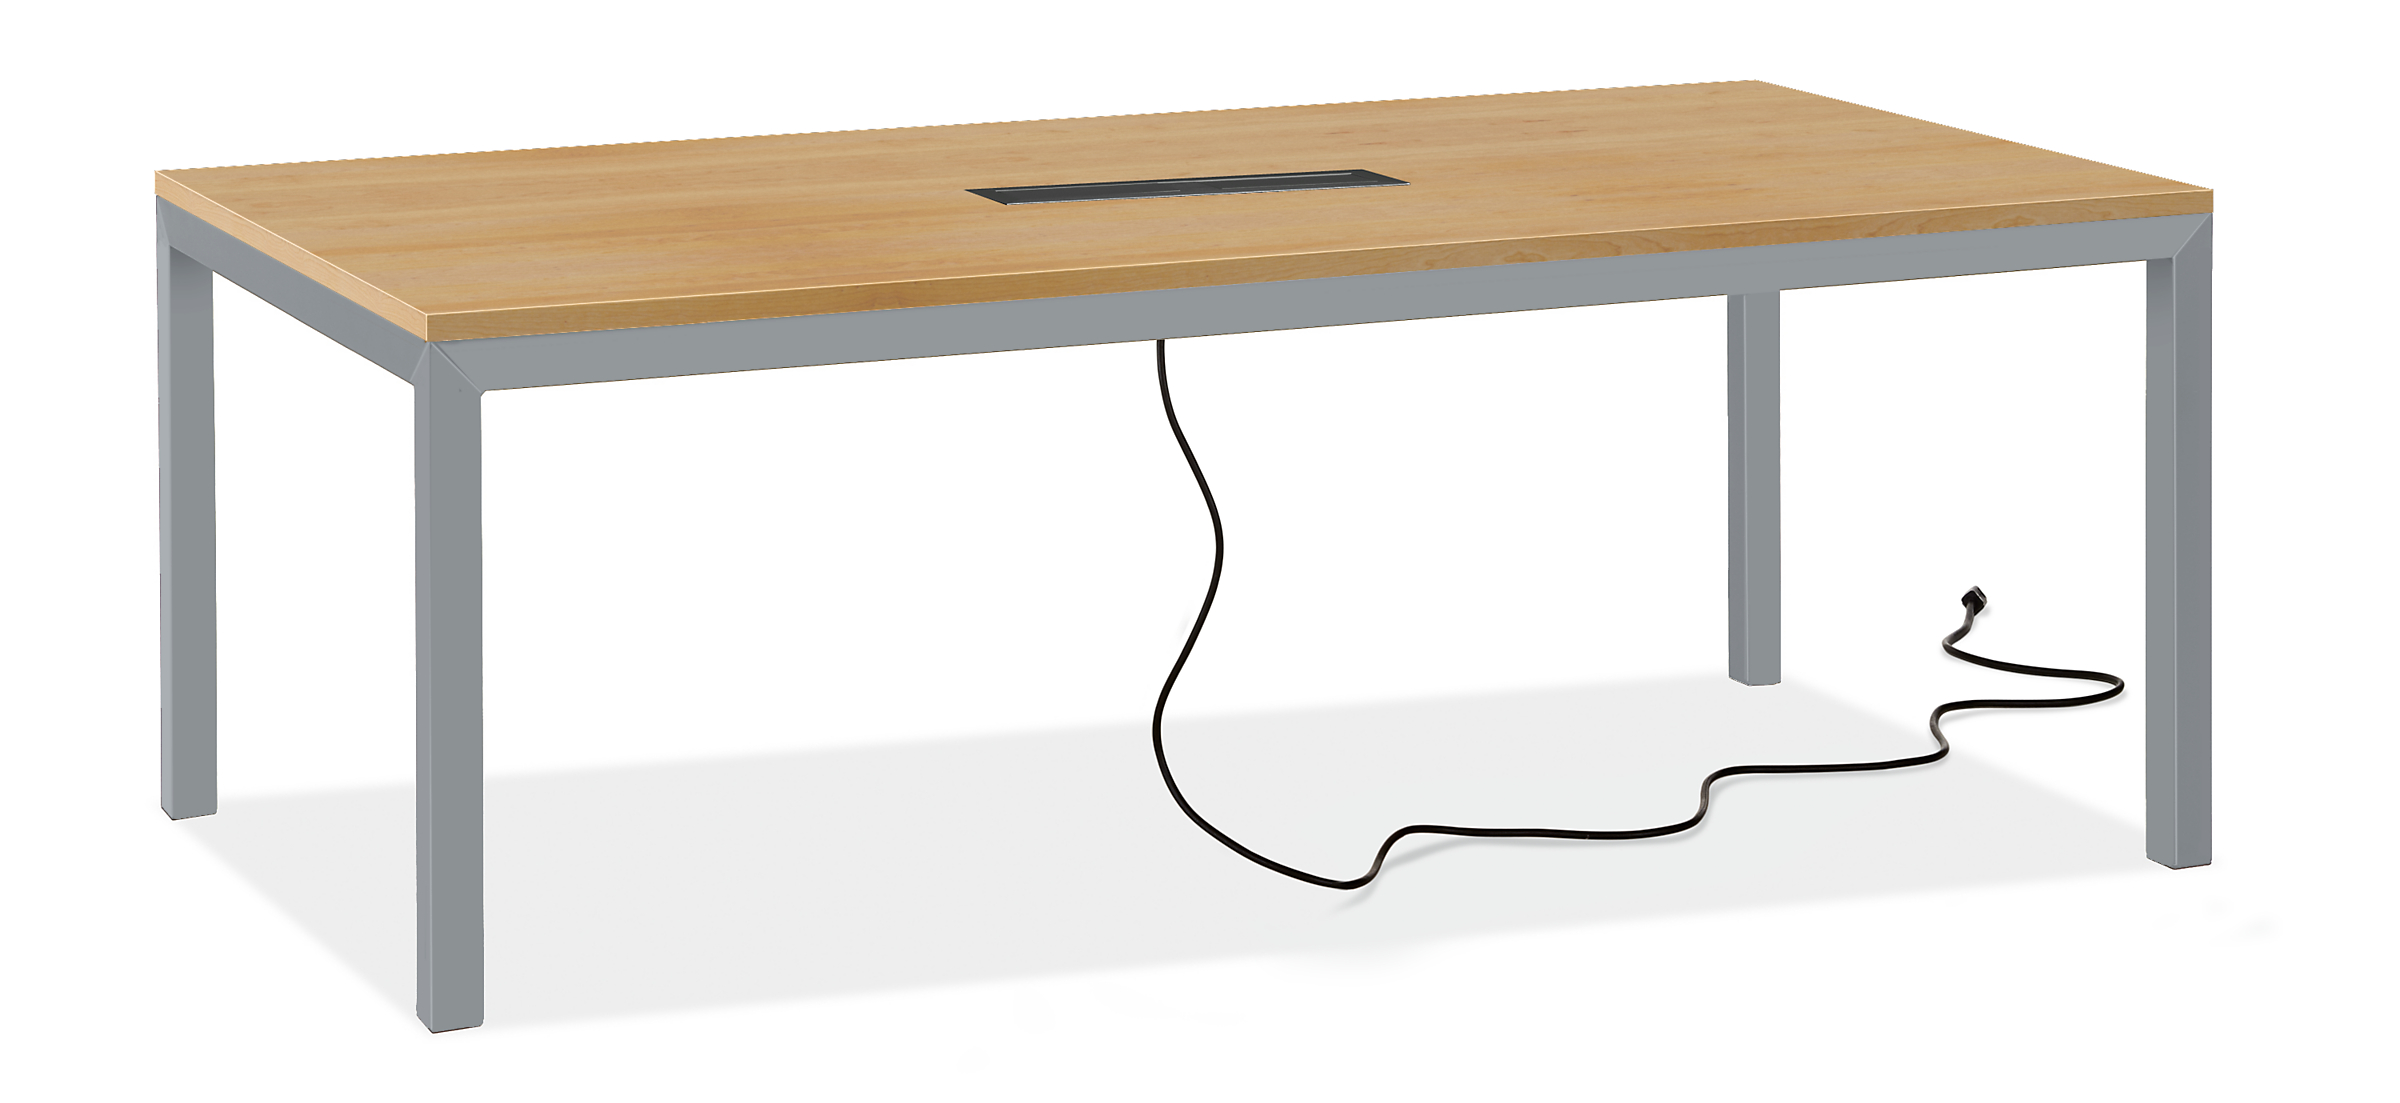 Parsons 78w 42d Table with Tabletop 8-Port Power/Charging Outlet & 2" Leg